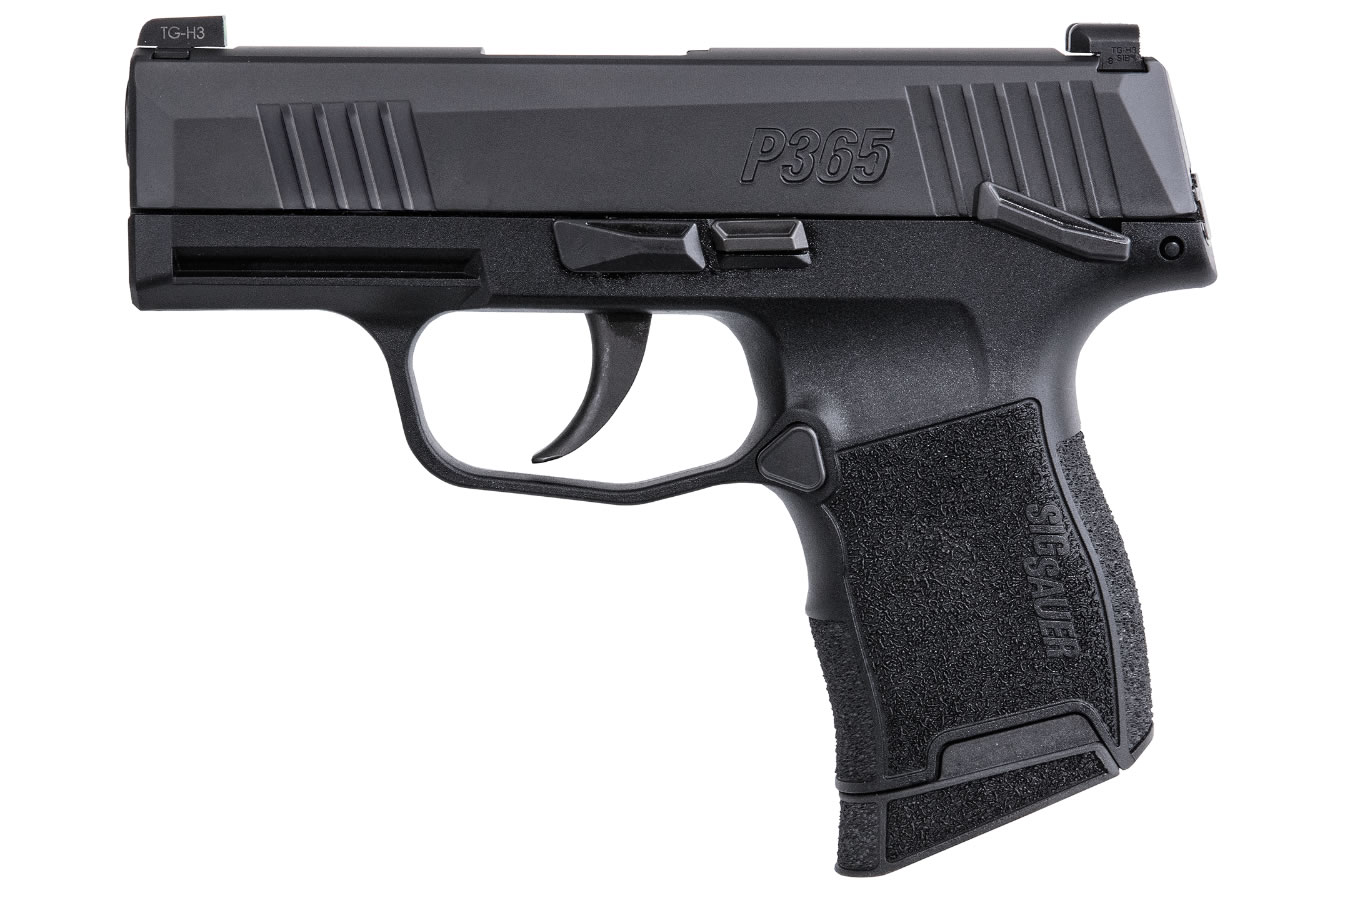 Sig Sauer P Mm Micro Compact Pistol With Manual Safety Le For Sale Online Law